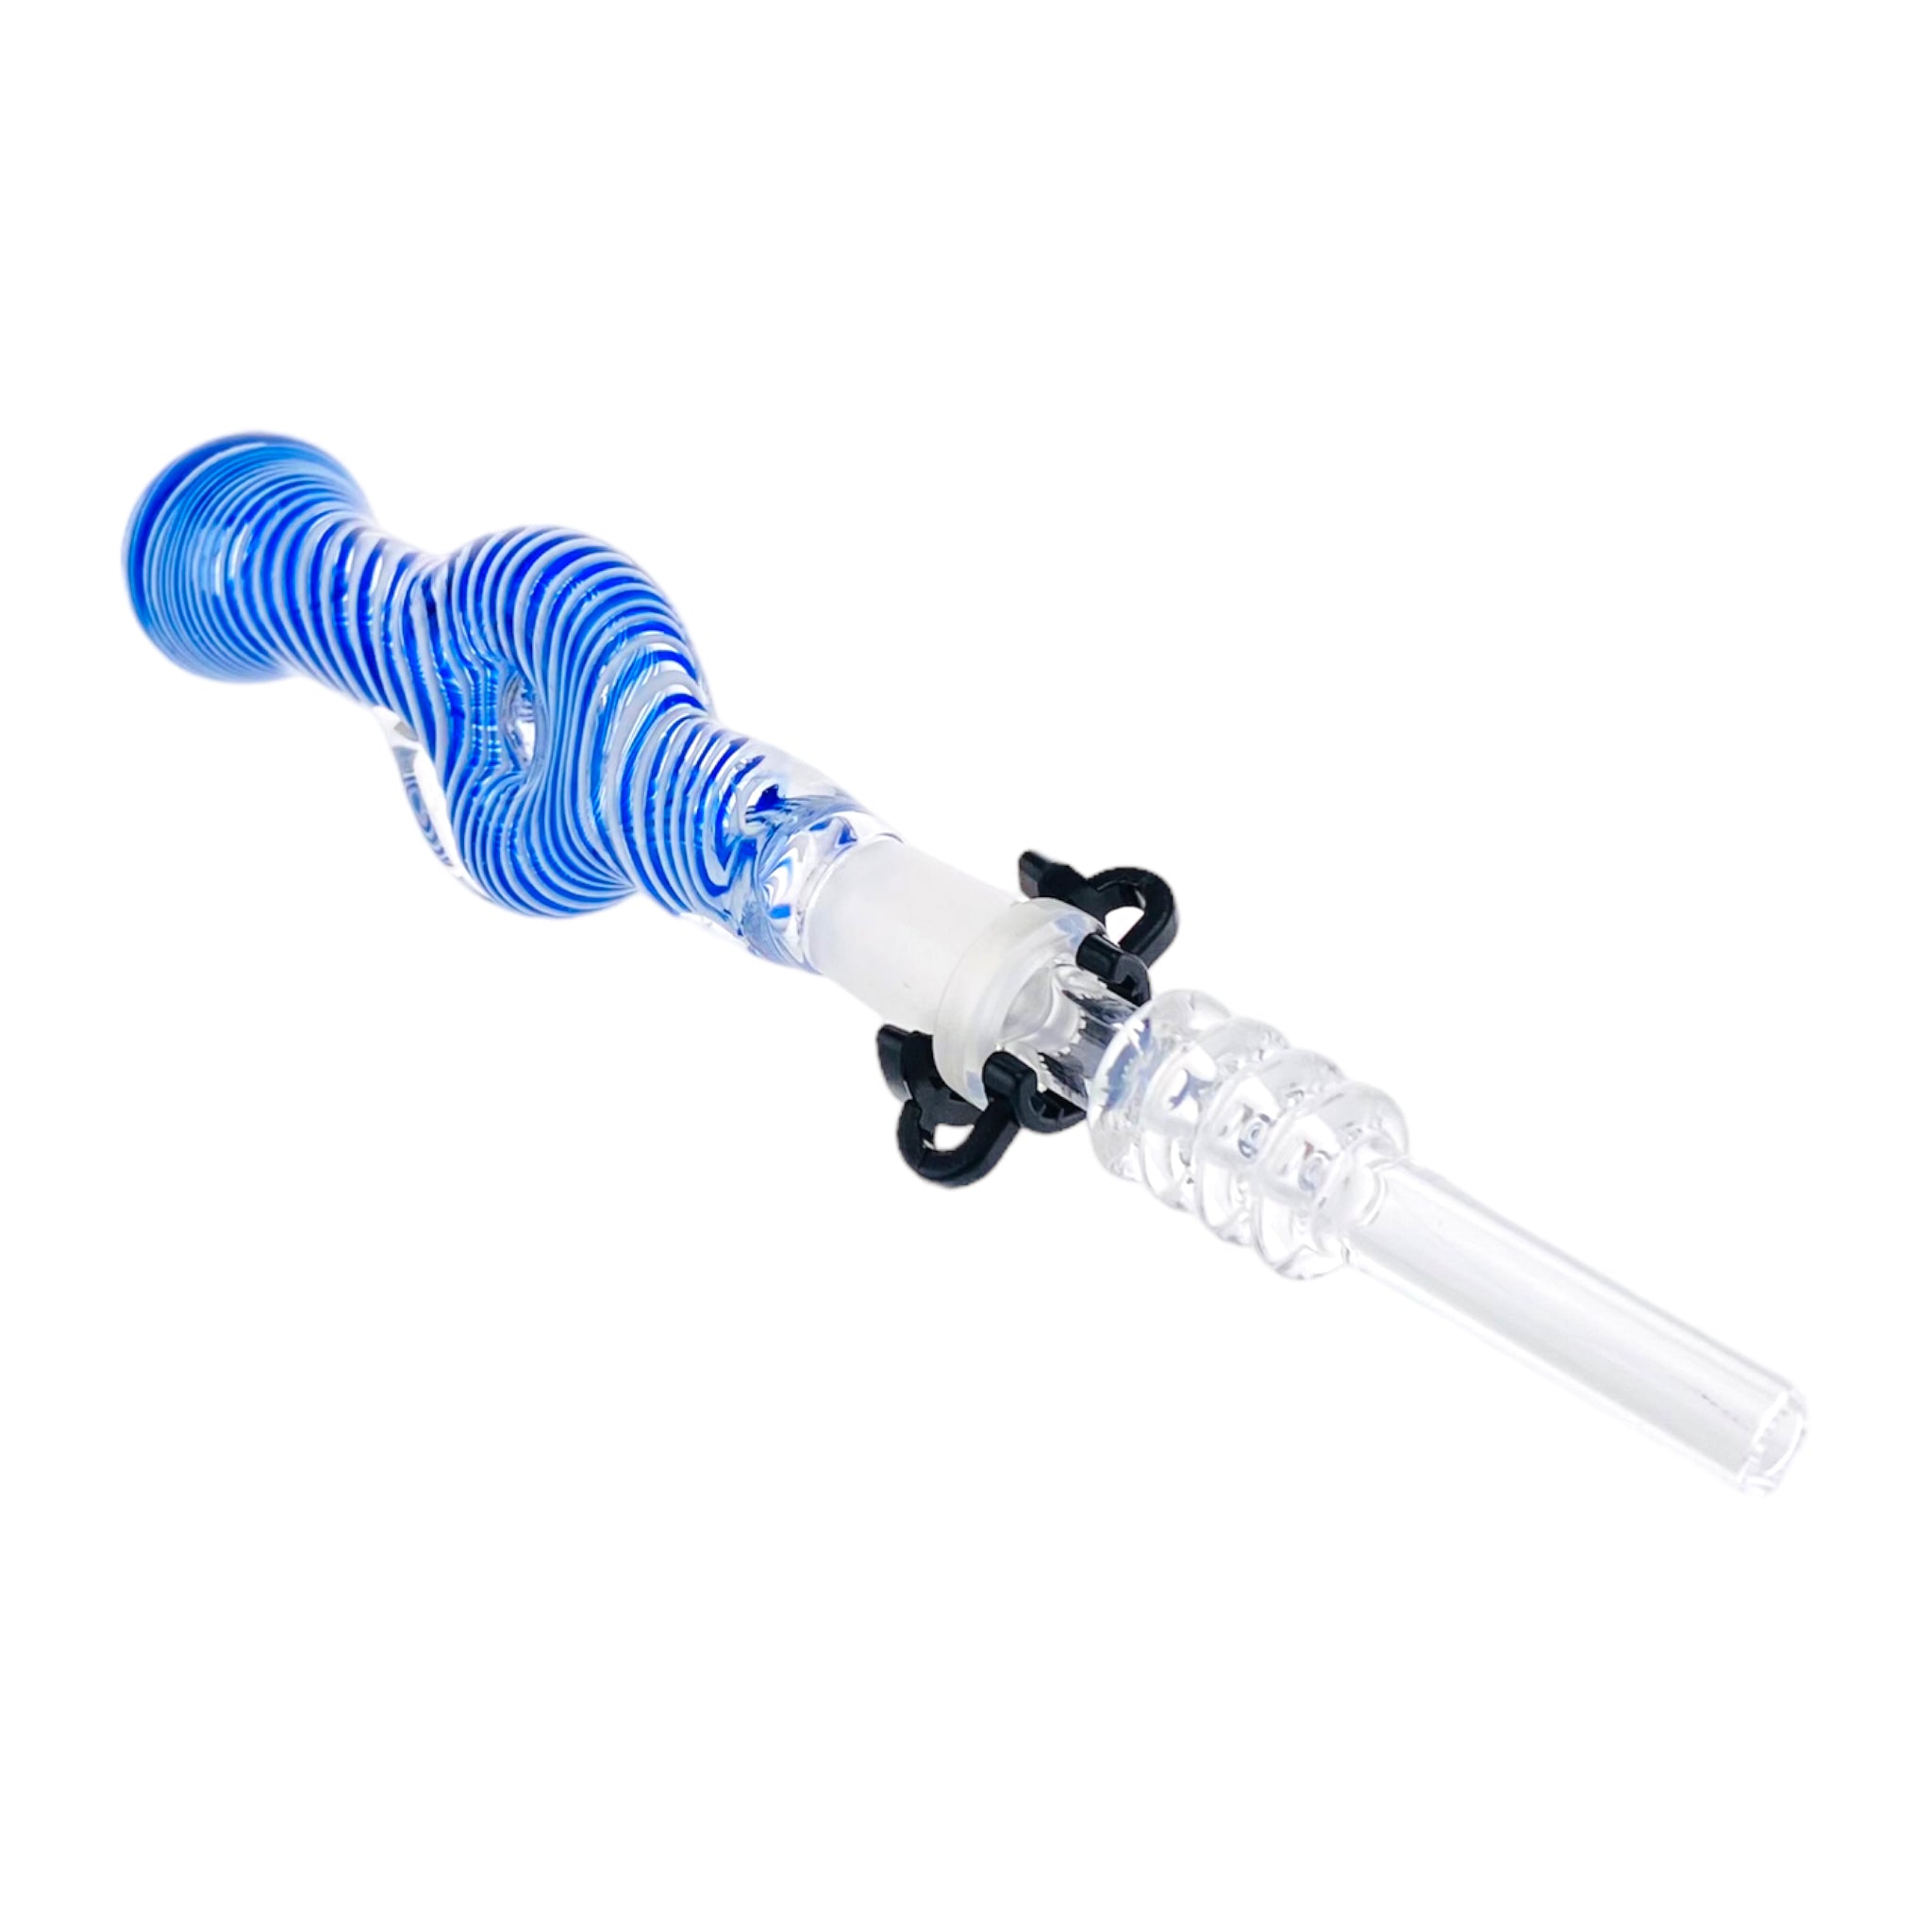 10mm Nectar Collector - Blue And White Inside Out Spiral Donut With Quartz Tip